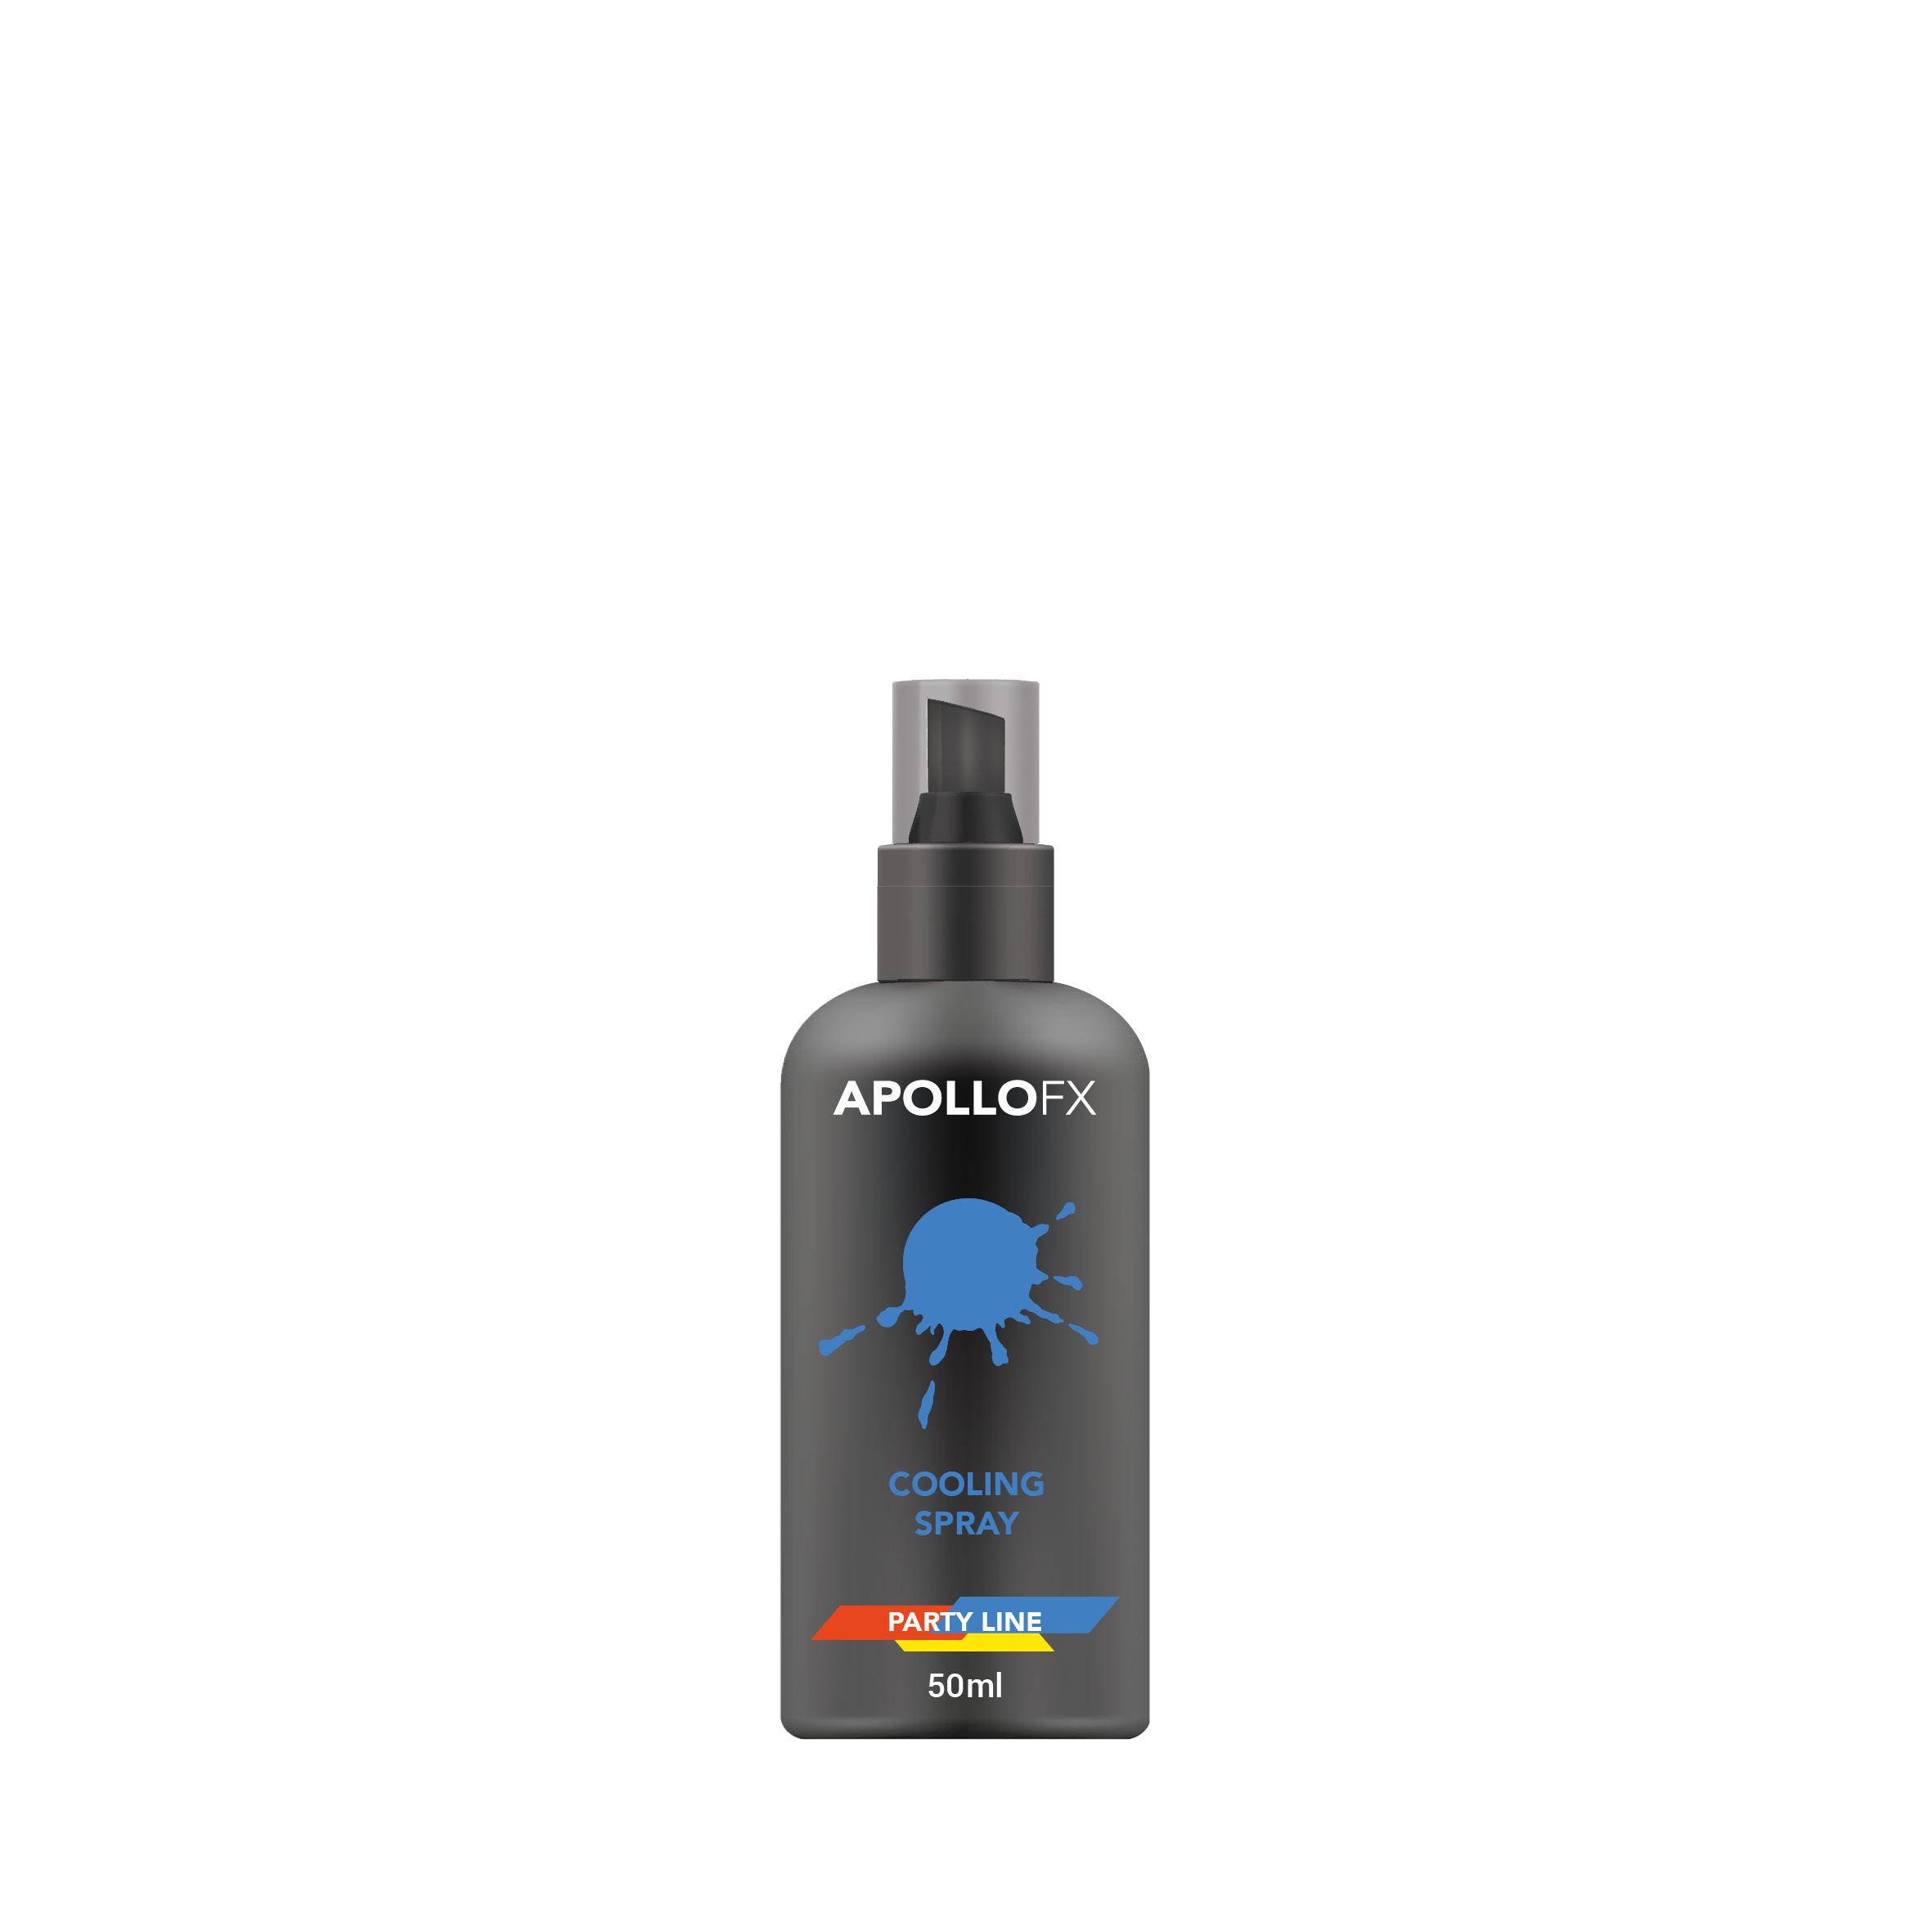 APOLLOFX PARTY LINE COOLING SPRAY 50 ml